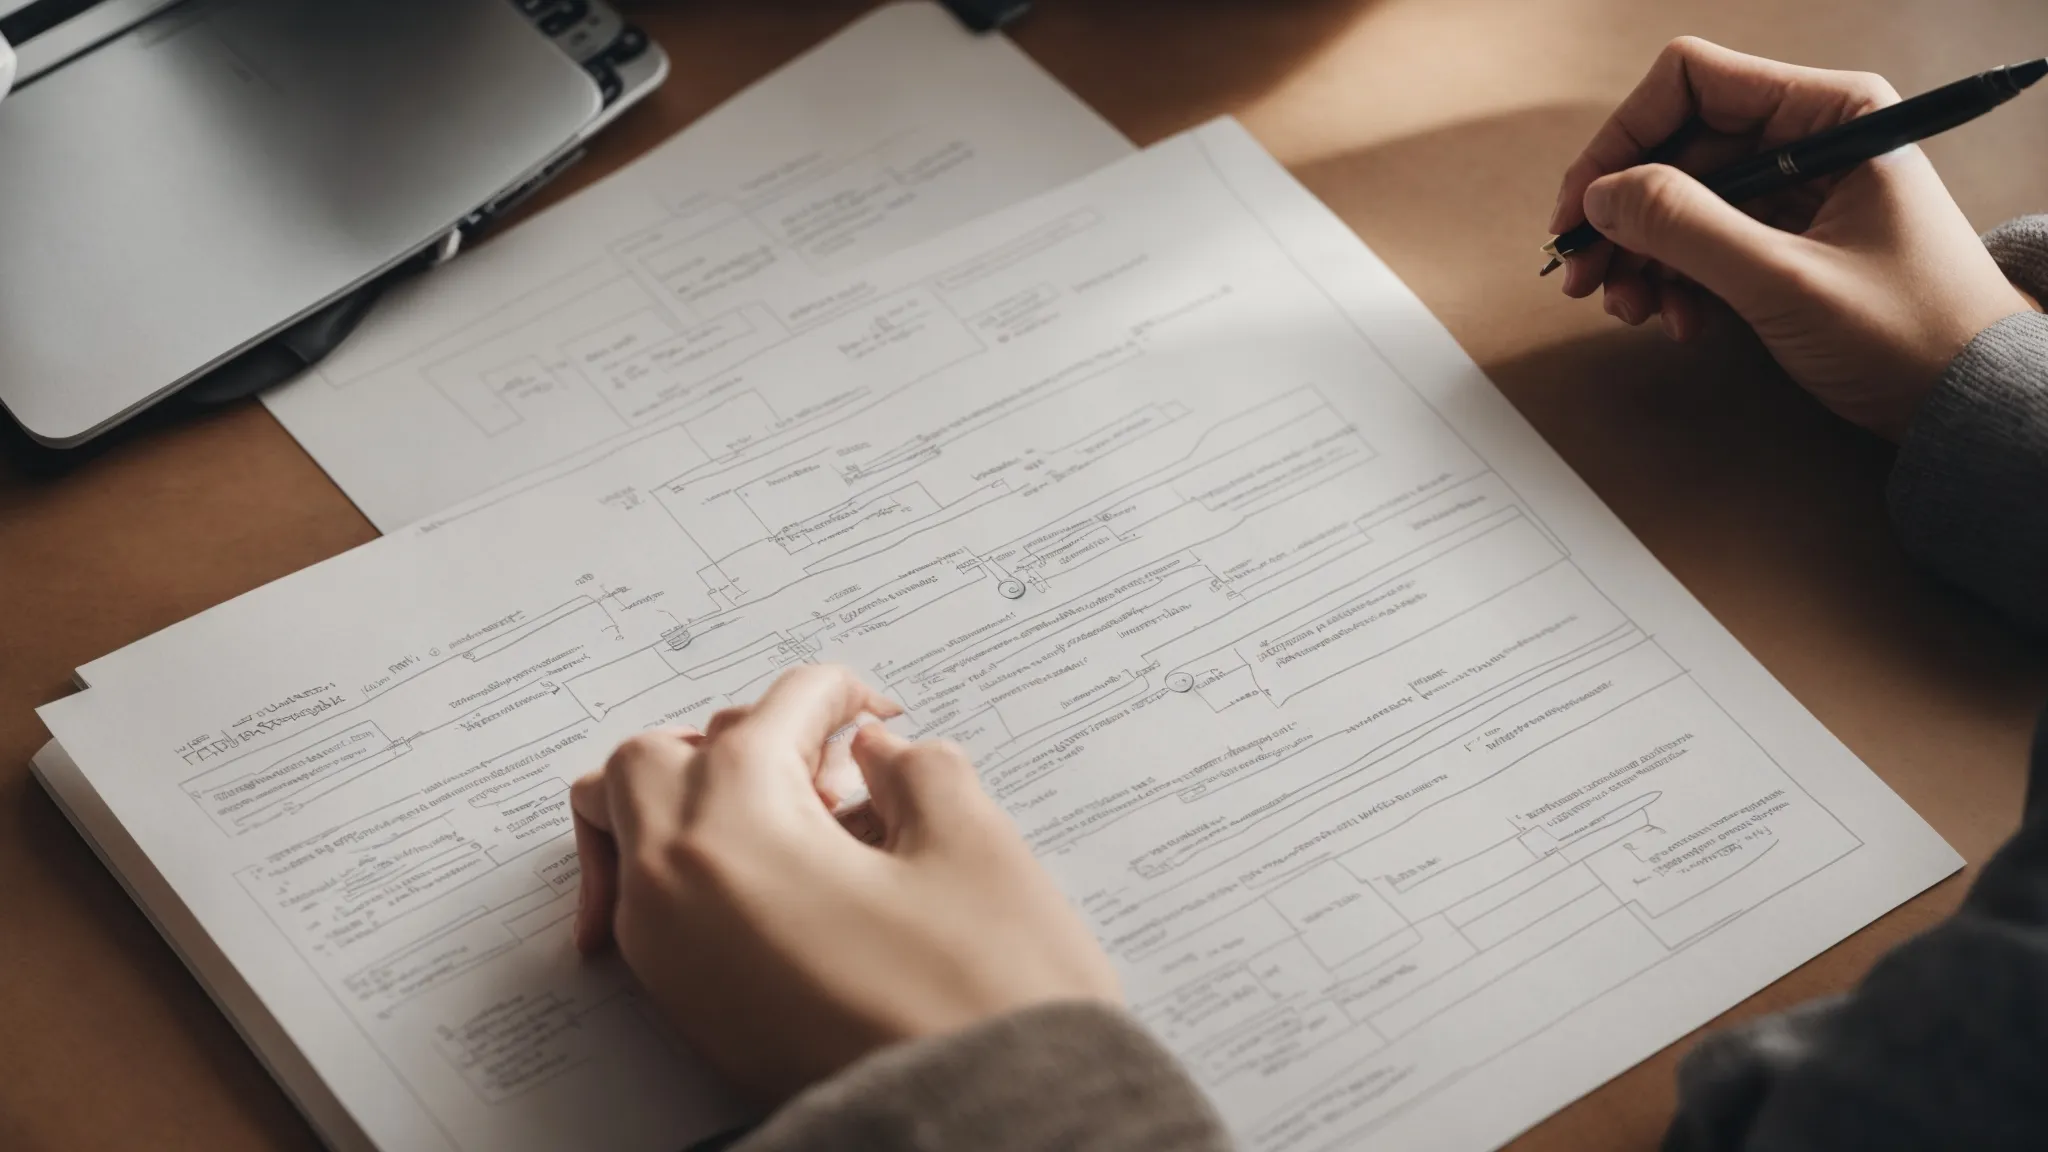 a designer thoughtfully sketches a streamlined flowchart illustrating the stages of user interaction on a website's contact page.